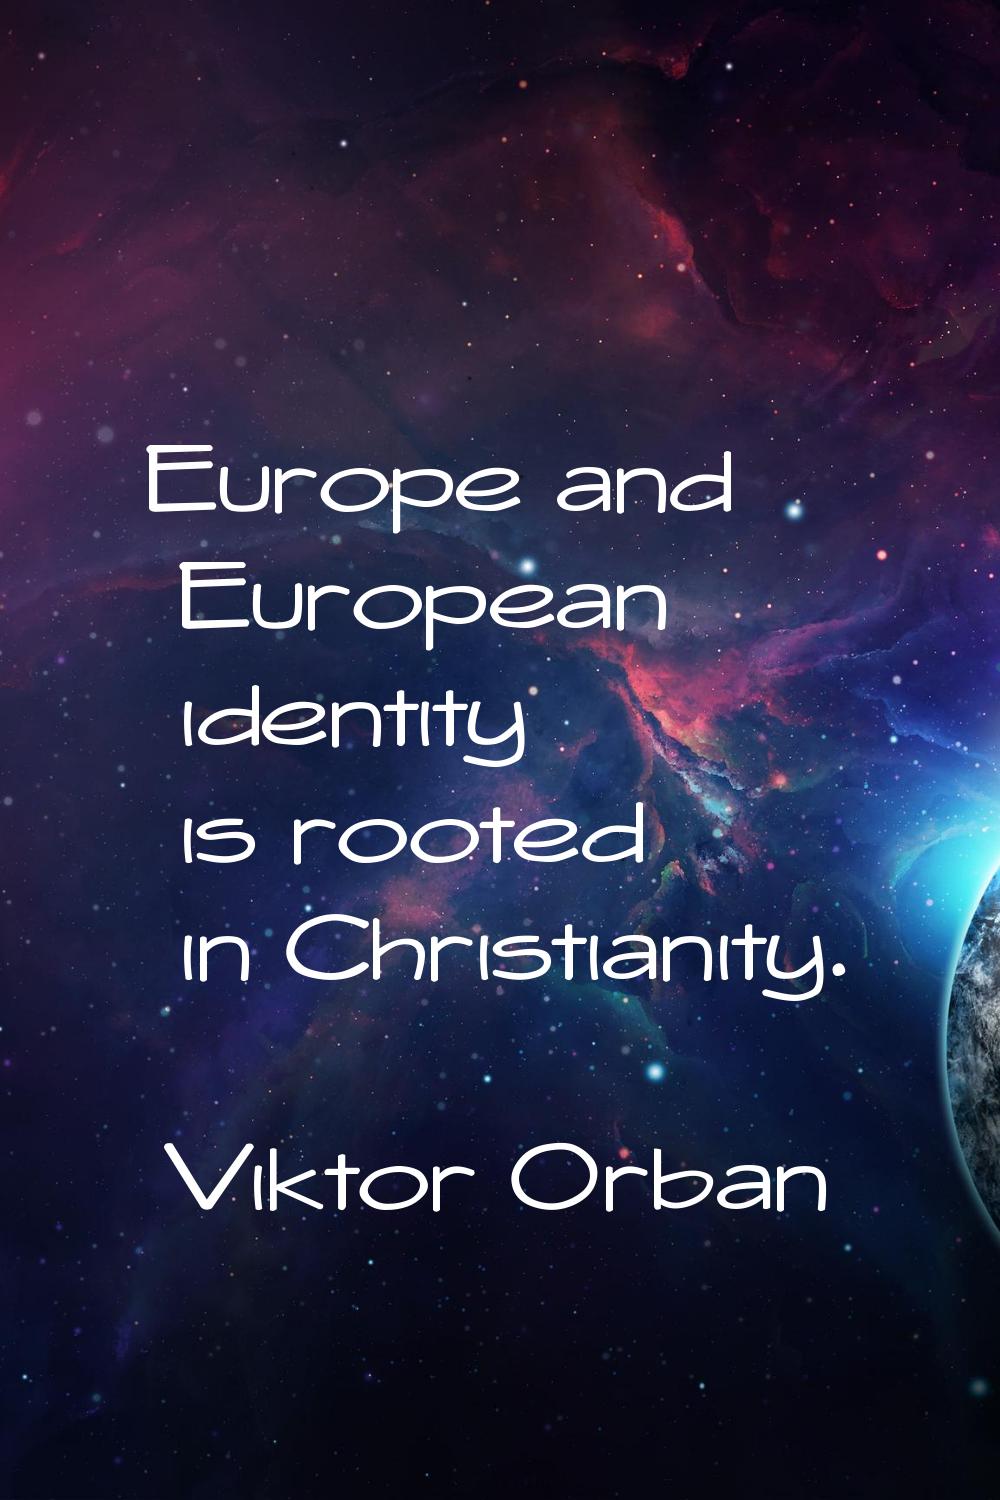 Europe and European identity is rooted in Christianity.